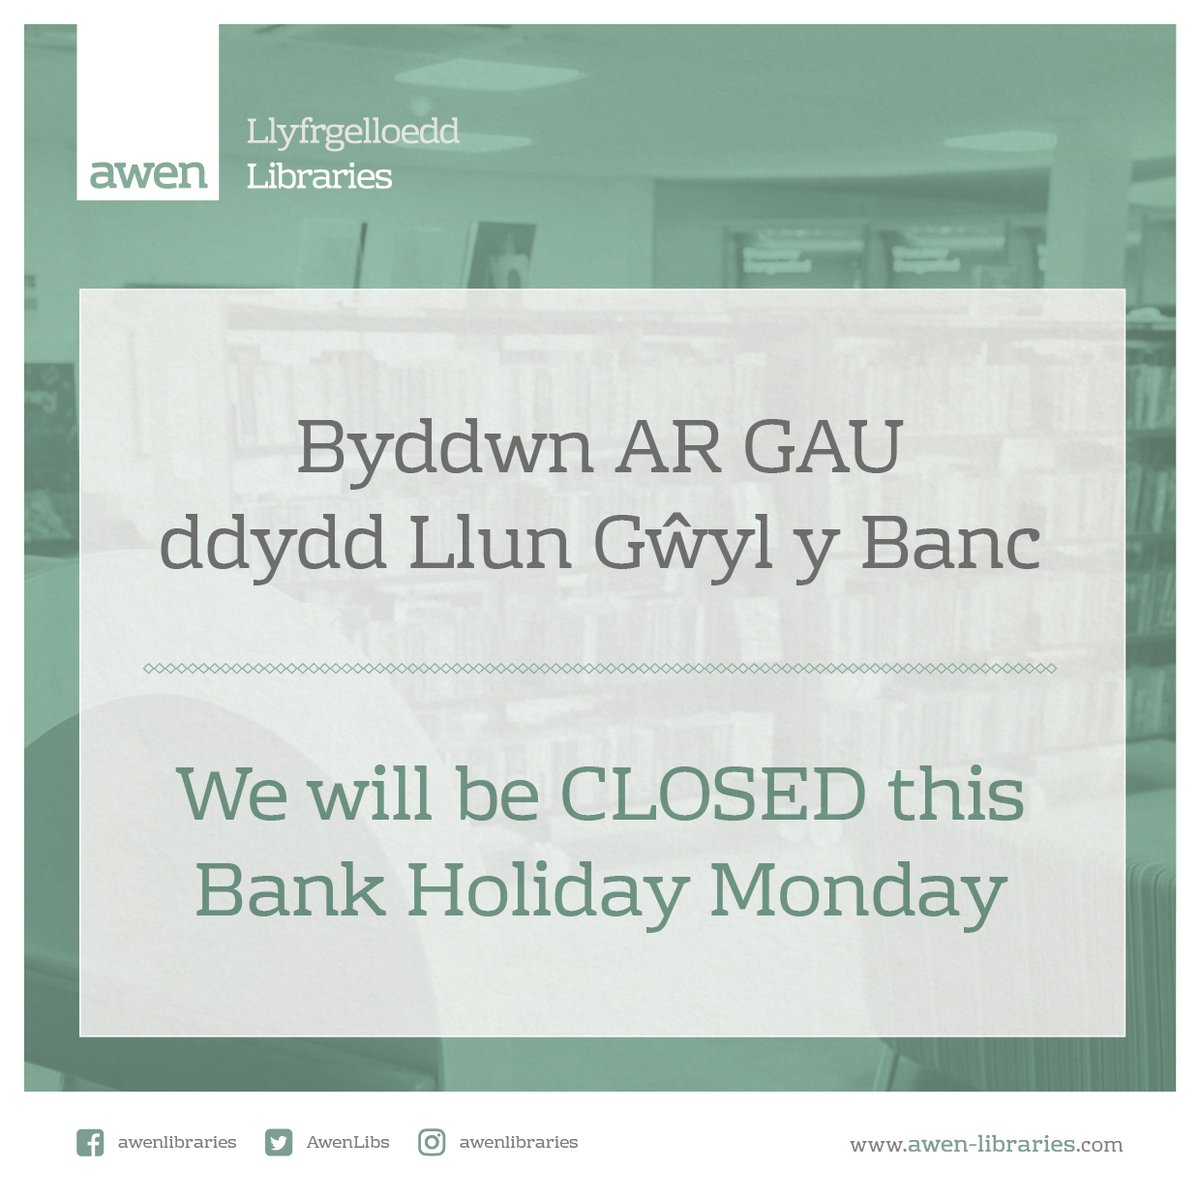 Please note our libraries will be closed Monday, 6th May for Bank Holiday. Our normal opening hours will resume from Tuesday, 7th May. #AwenLibraries #LoveLibraries #BankHoliday